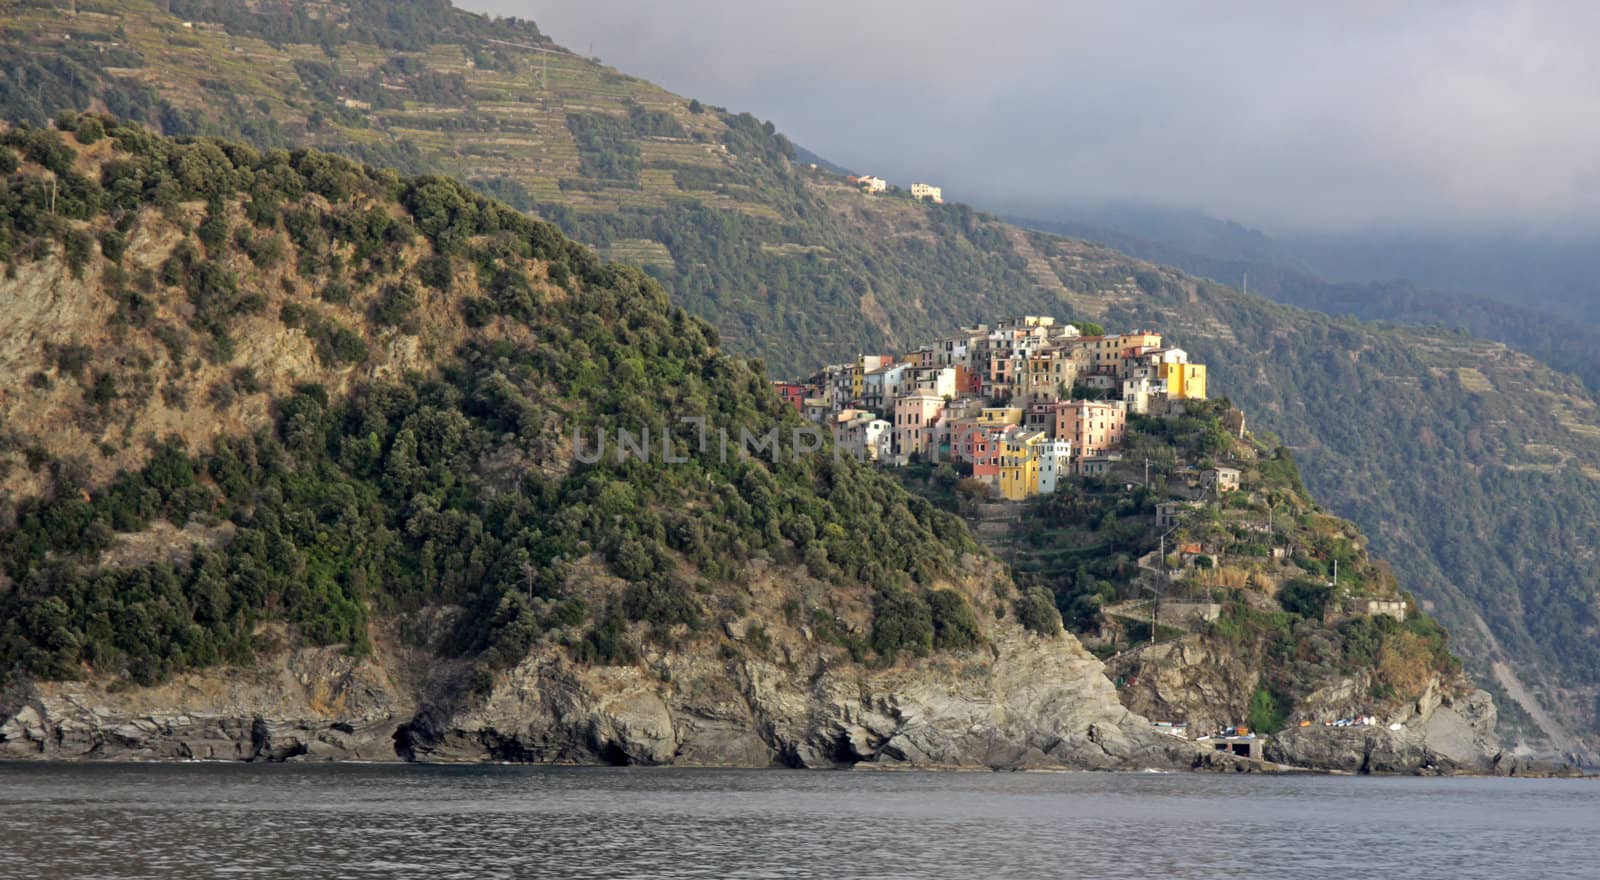 The Outskirts of Riomaggiore by ca2hill